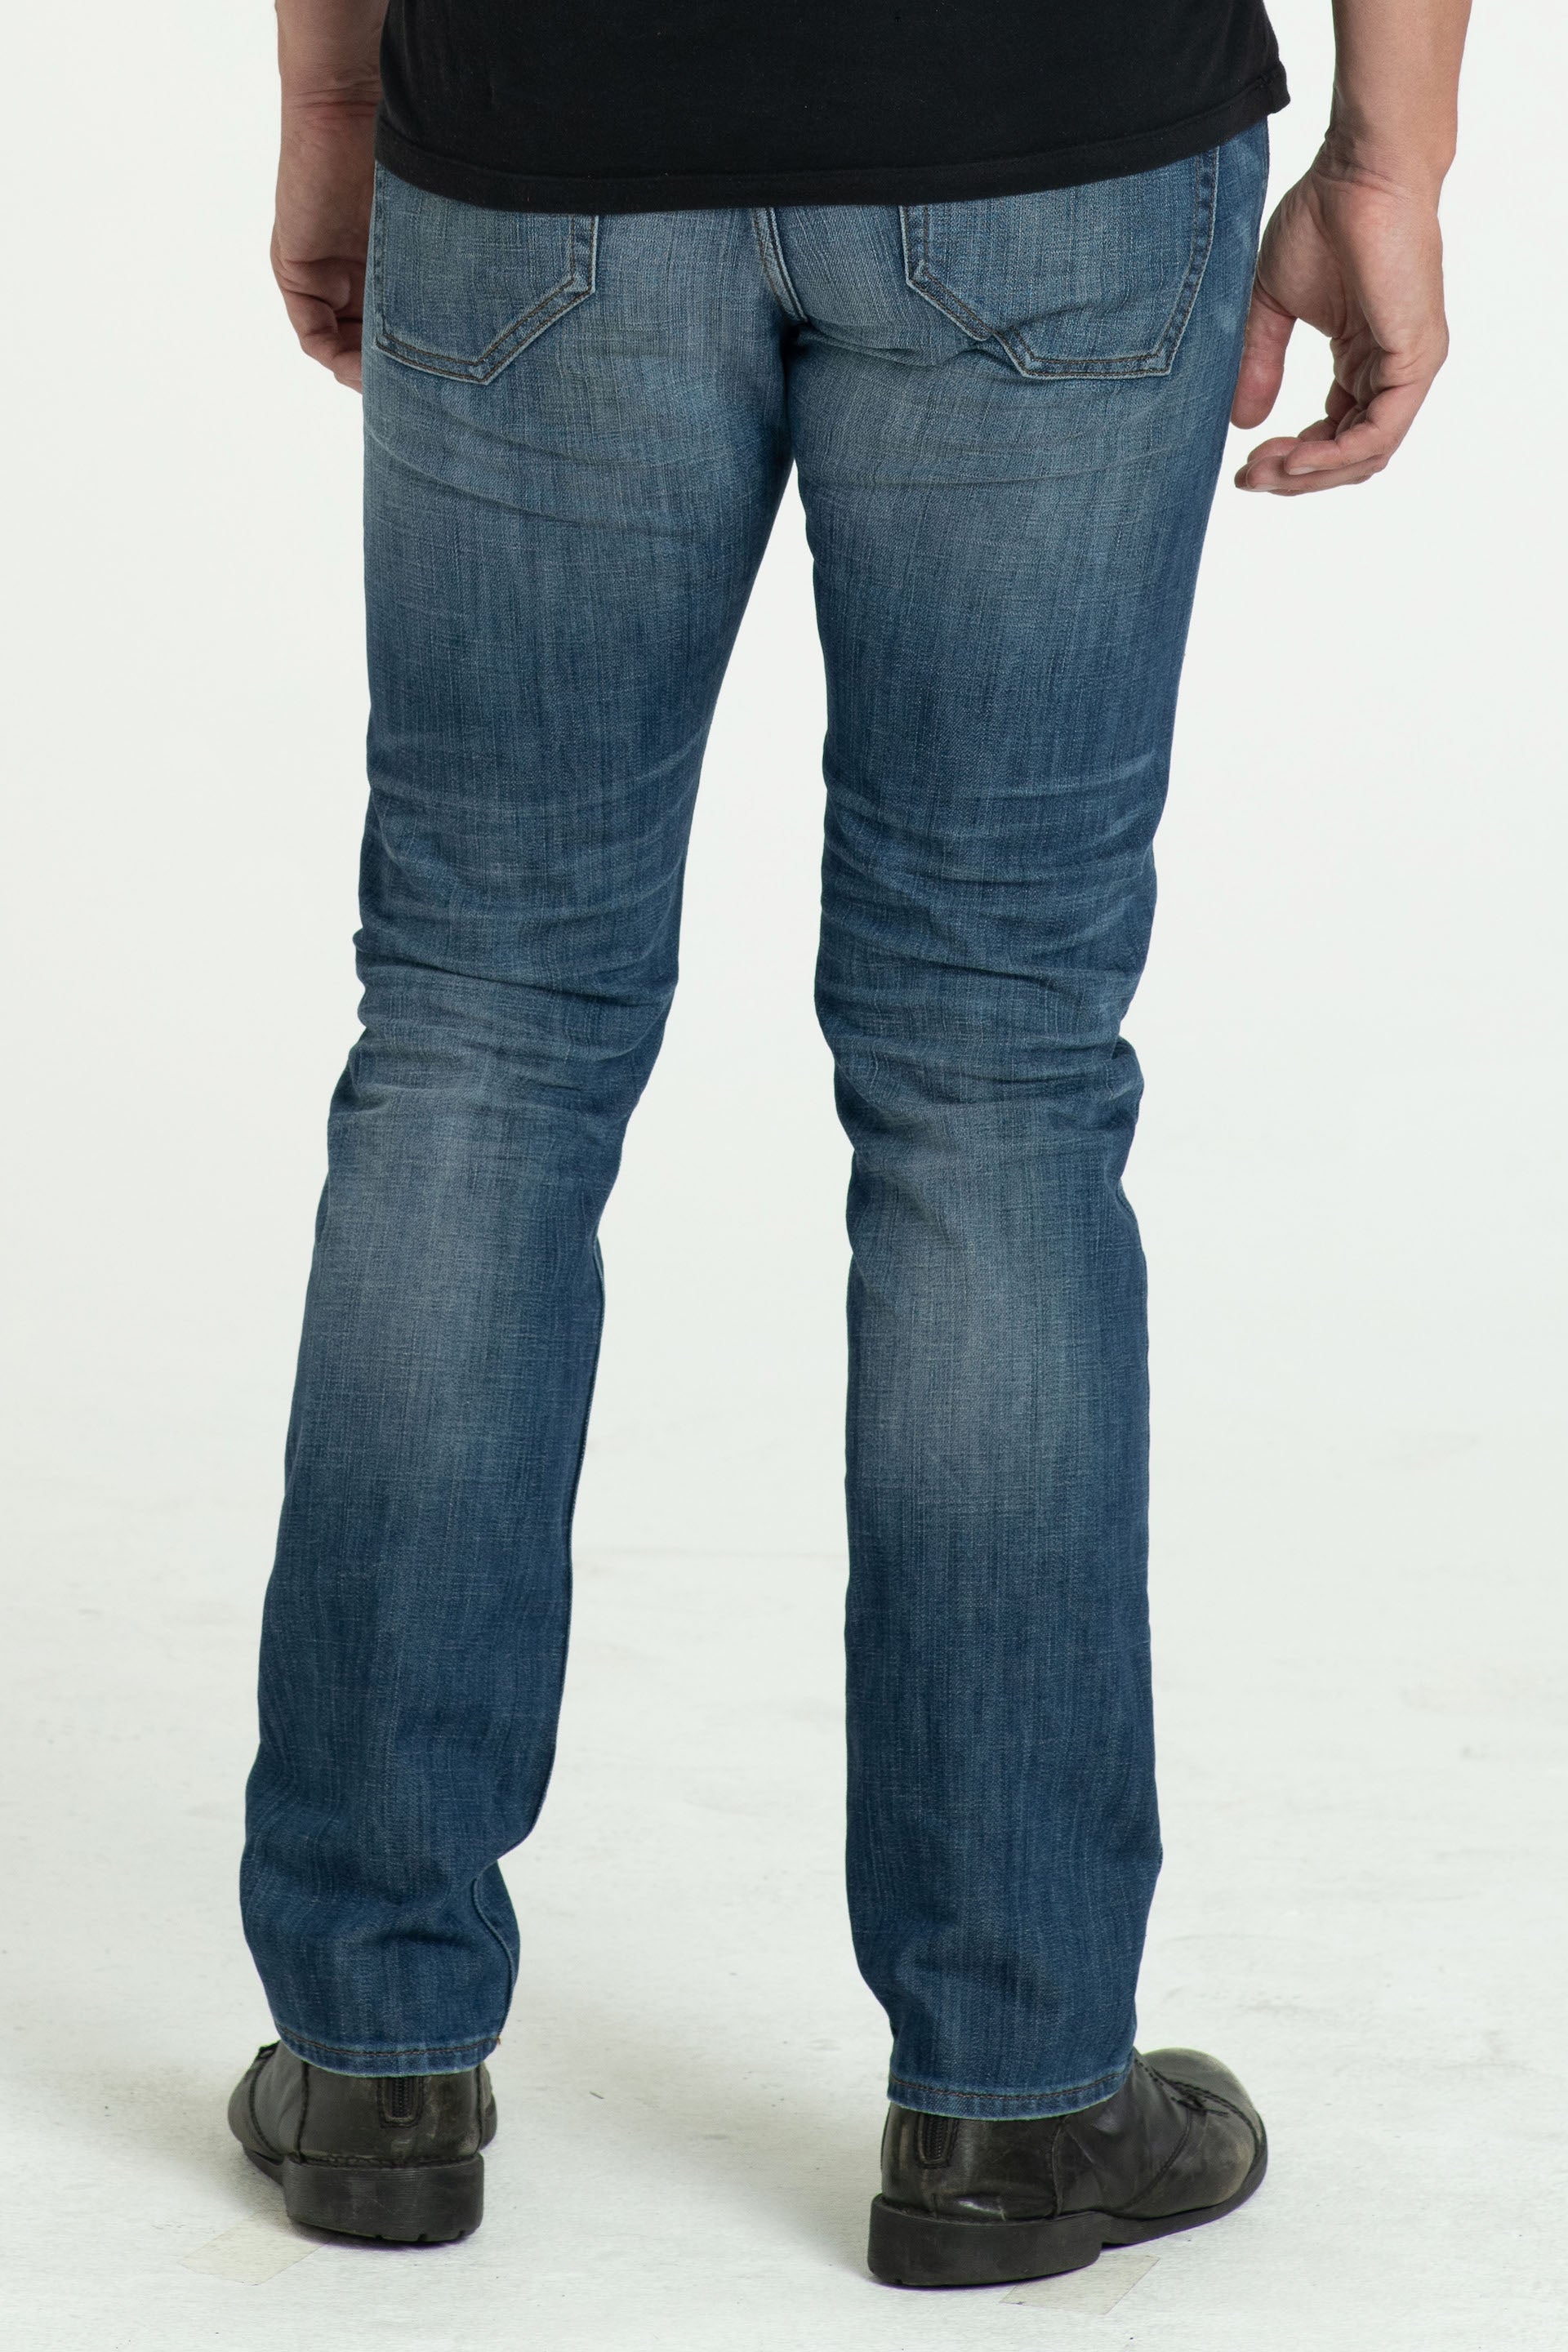 BARFLY SLIM JEANS IN WASTED BLUES